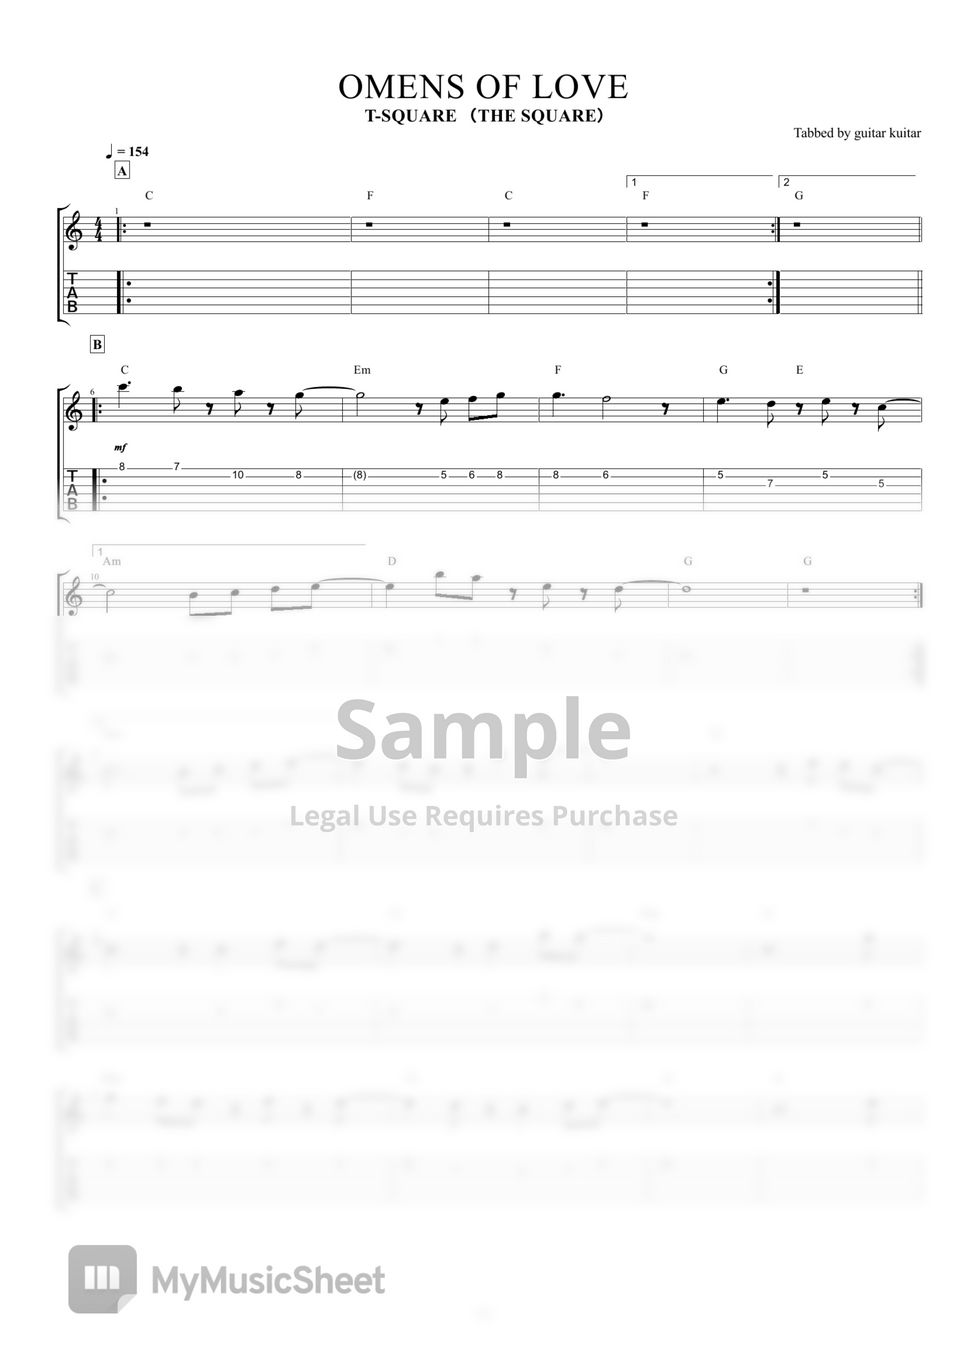 T-SQUARE - OMENS OF LOVE (Sheet Music) by guitar kuitar